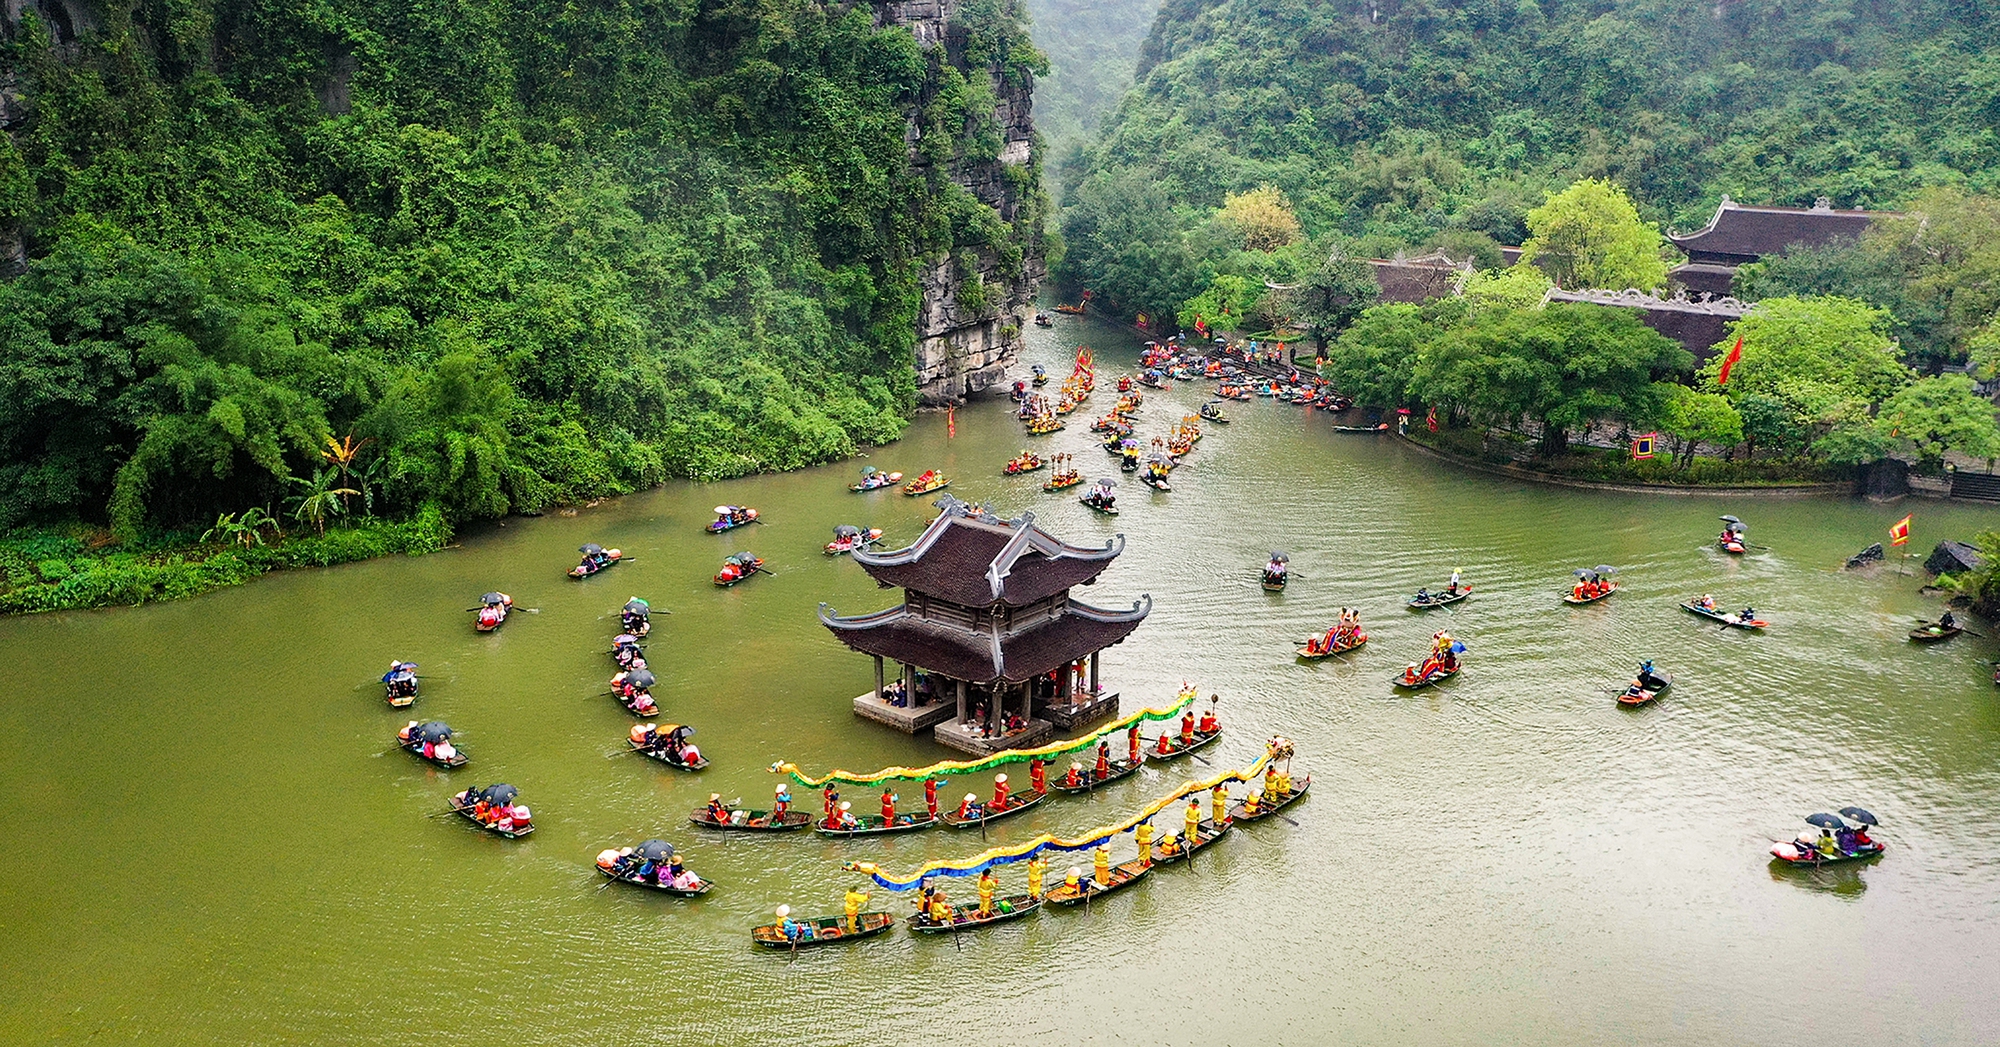 Tourism development associated with biodiversity conservation in Ninh Binh